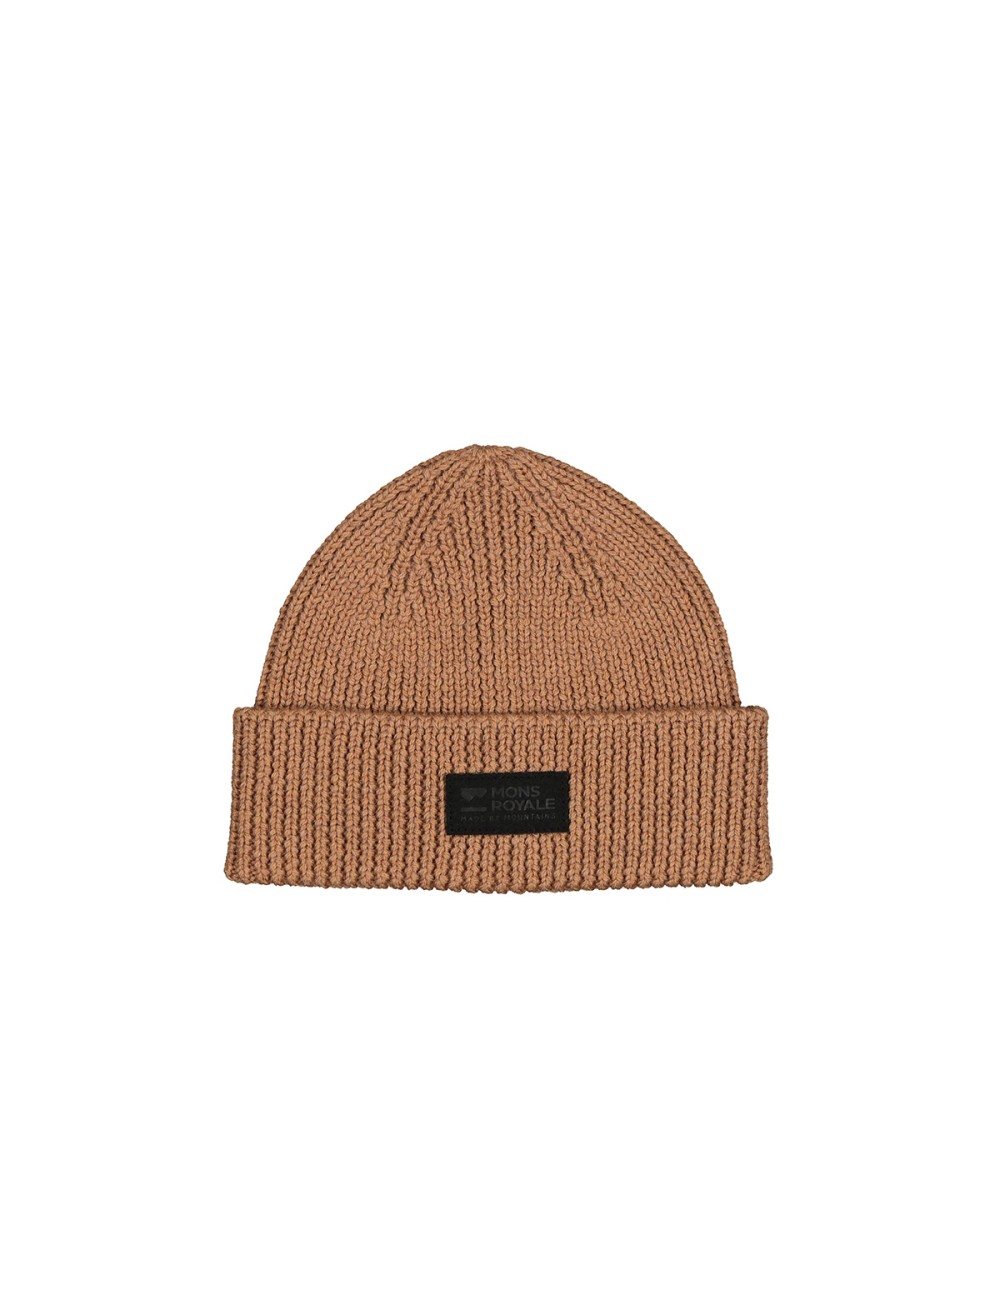 Mons Royale Fisherman's 2.0 Beanie - Toffee